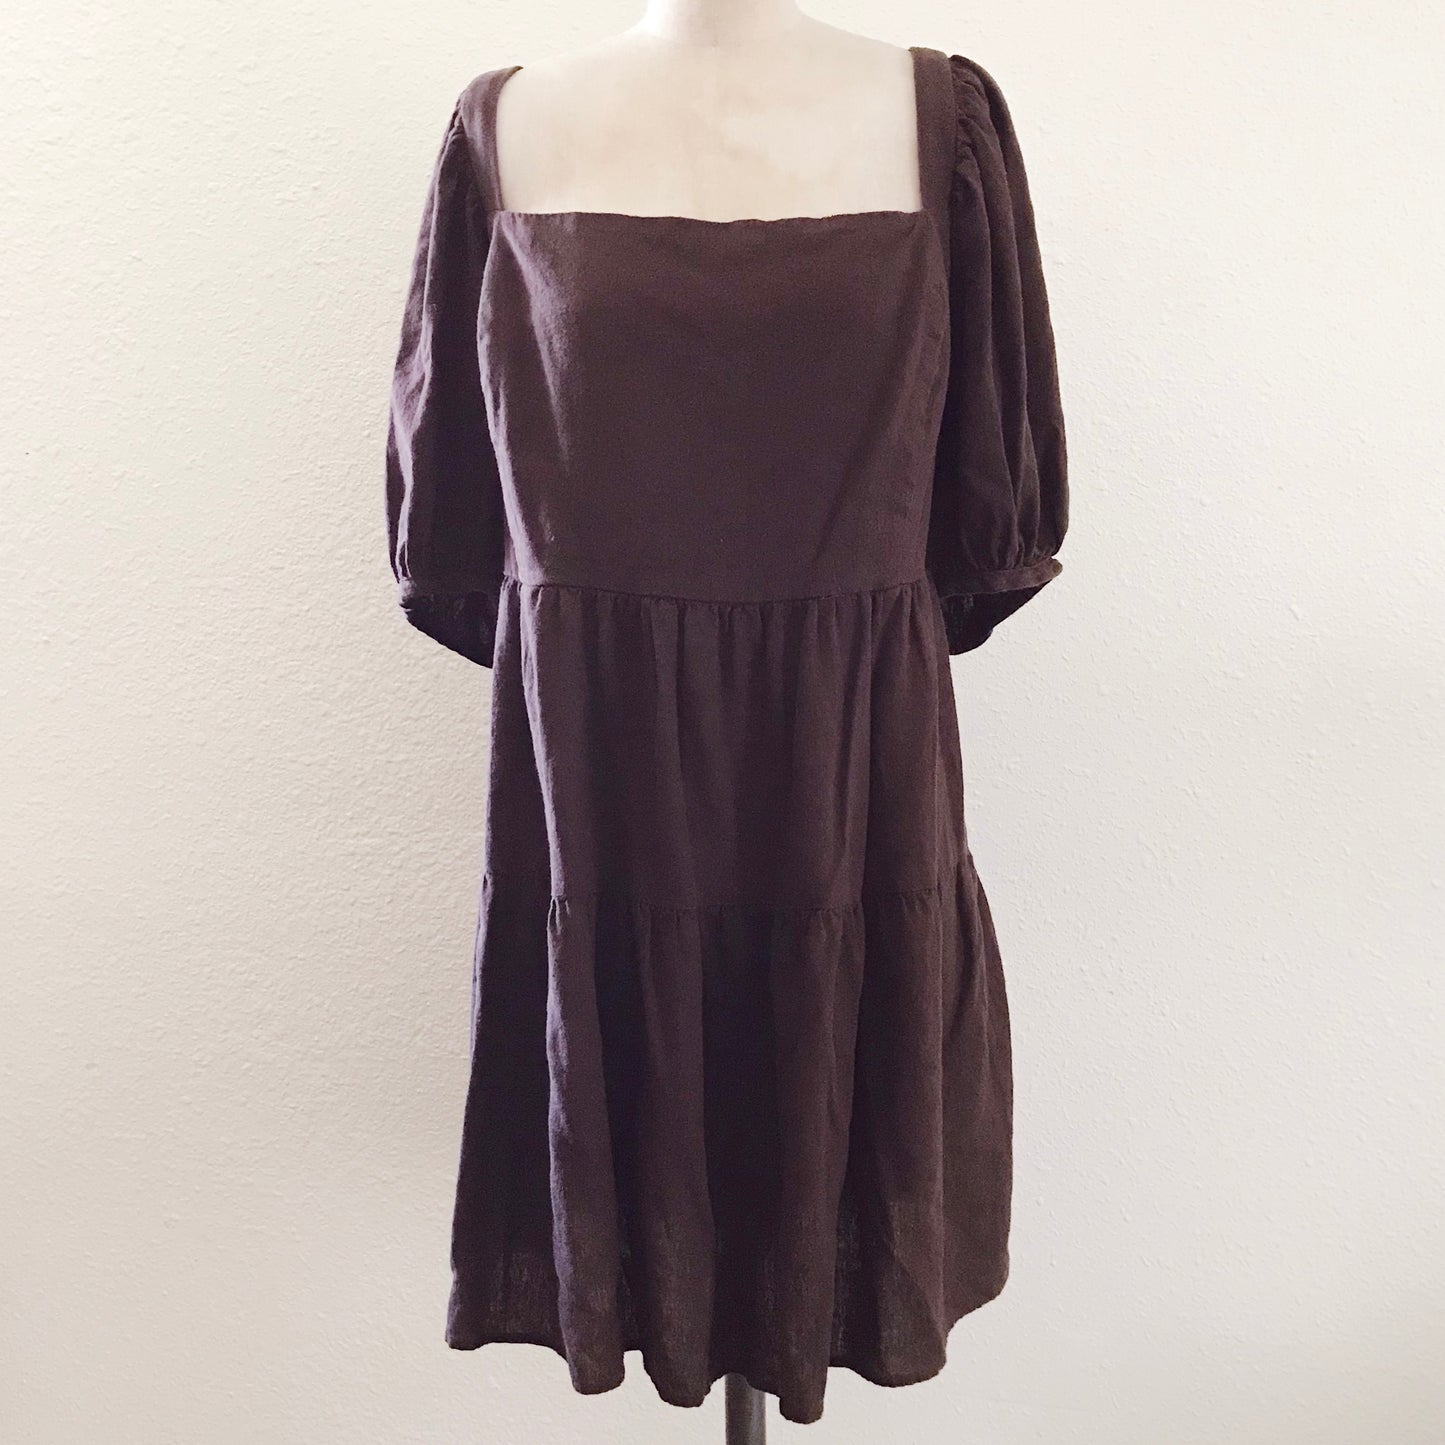 House of Harlow Brown Cotton Linen Tiered Short Sleeve Mini Dress